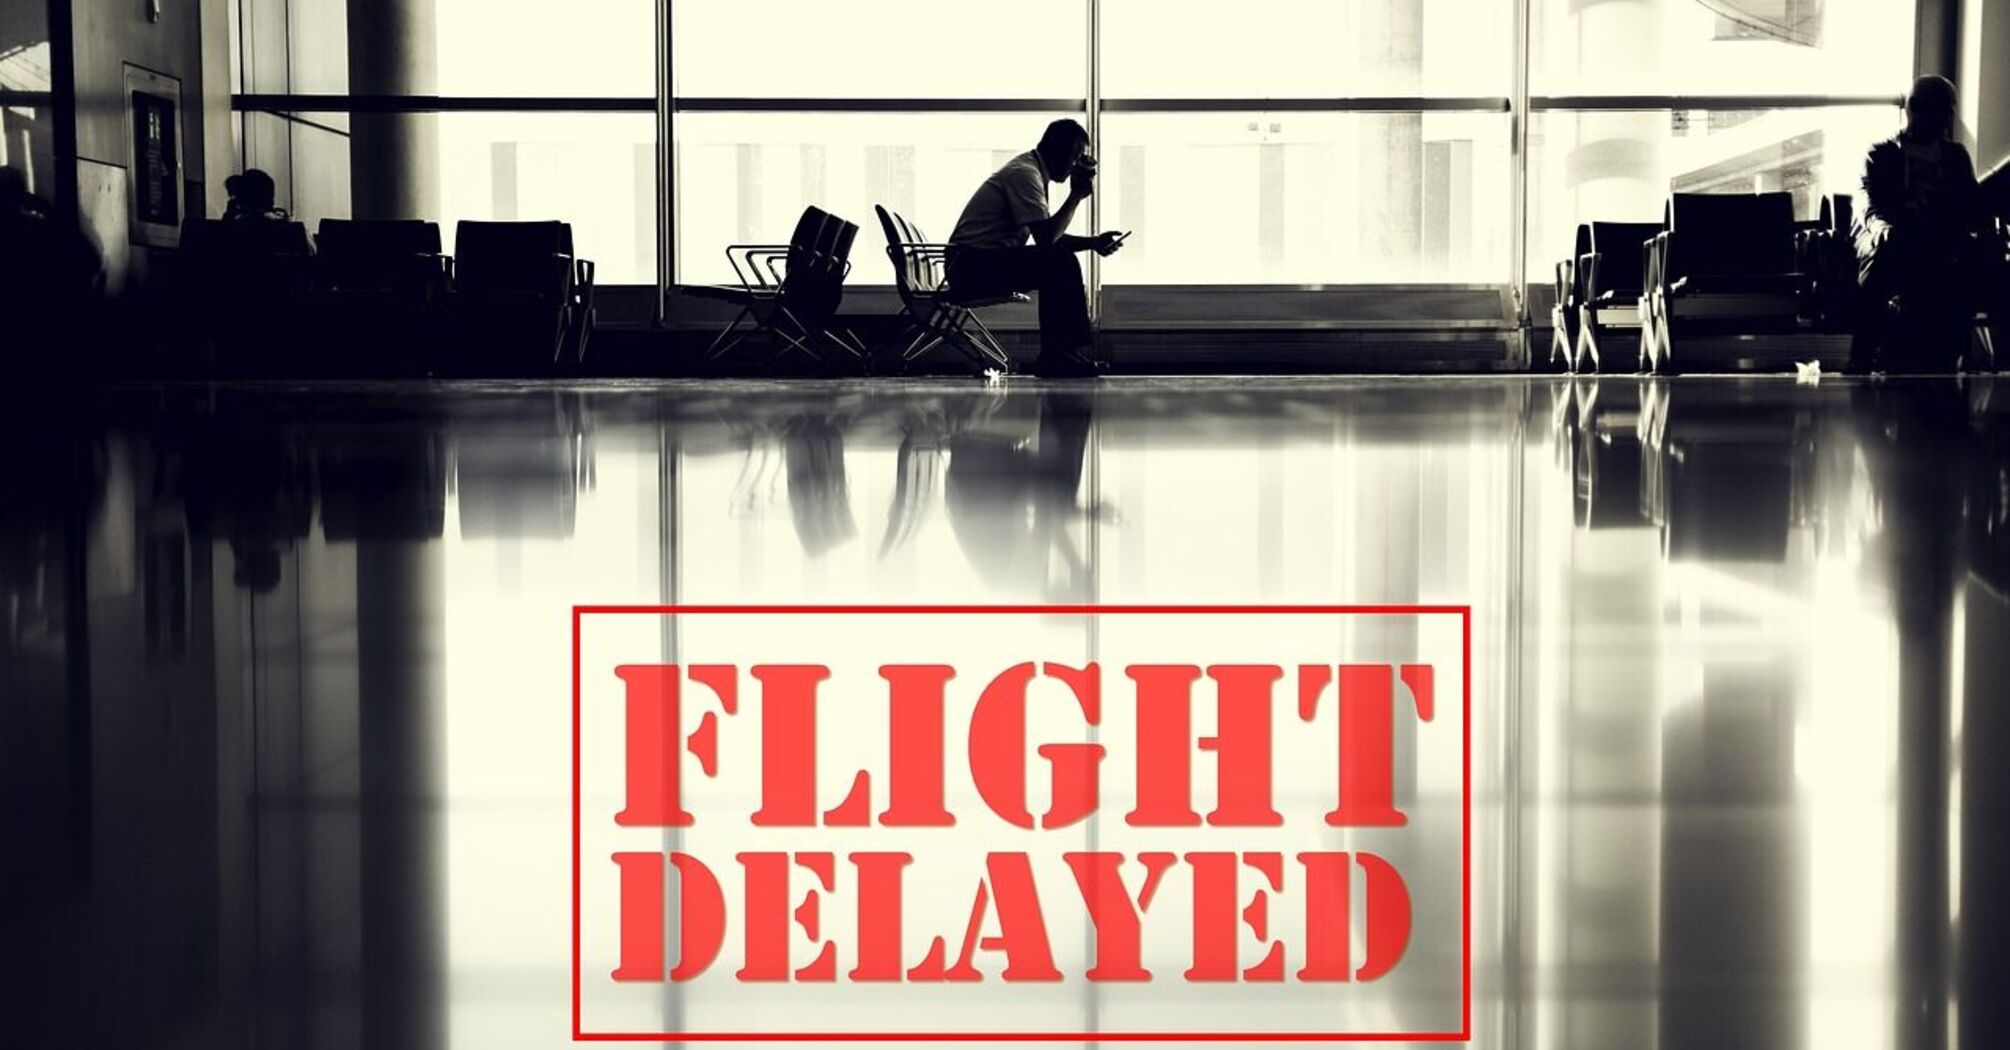 Top 15 top reasons why flights are delayed: from bad weather and waiting for luggage to strikes, bird collisions and crew tardiness